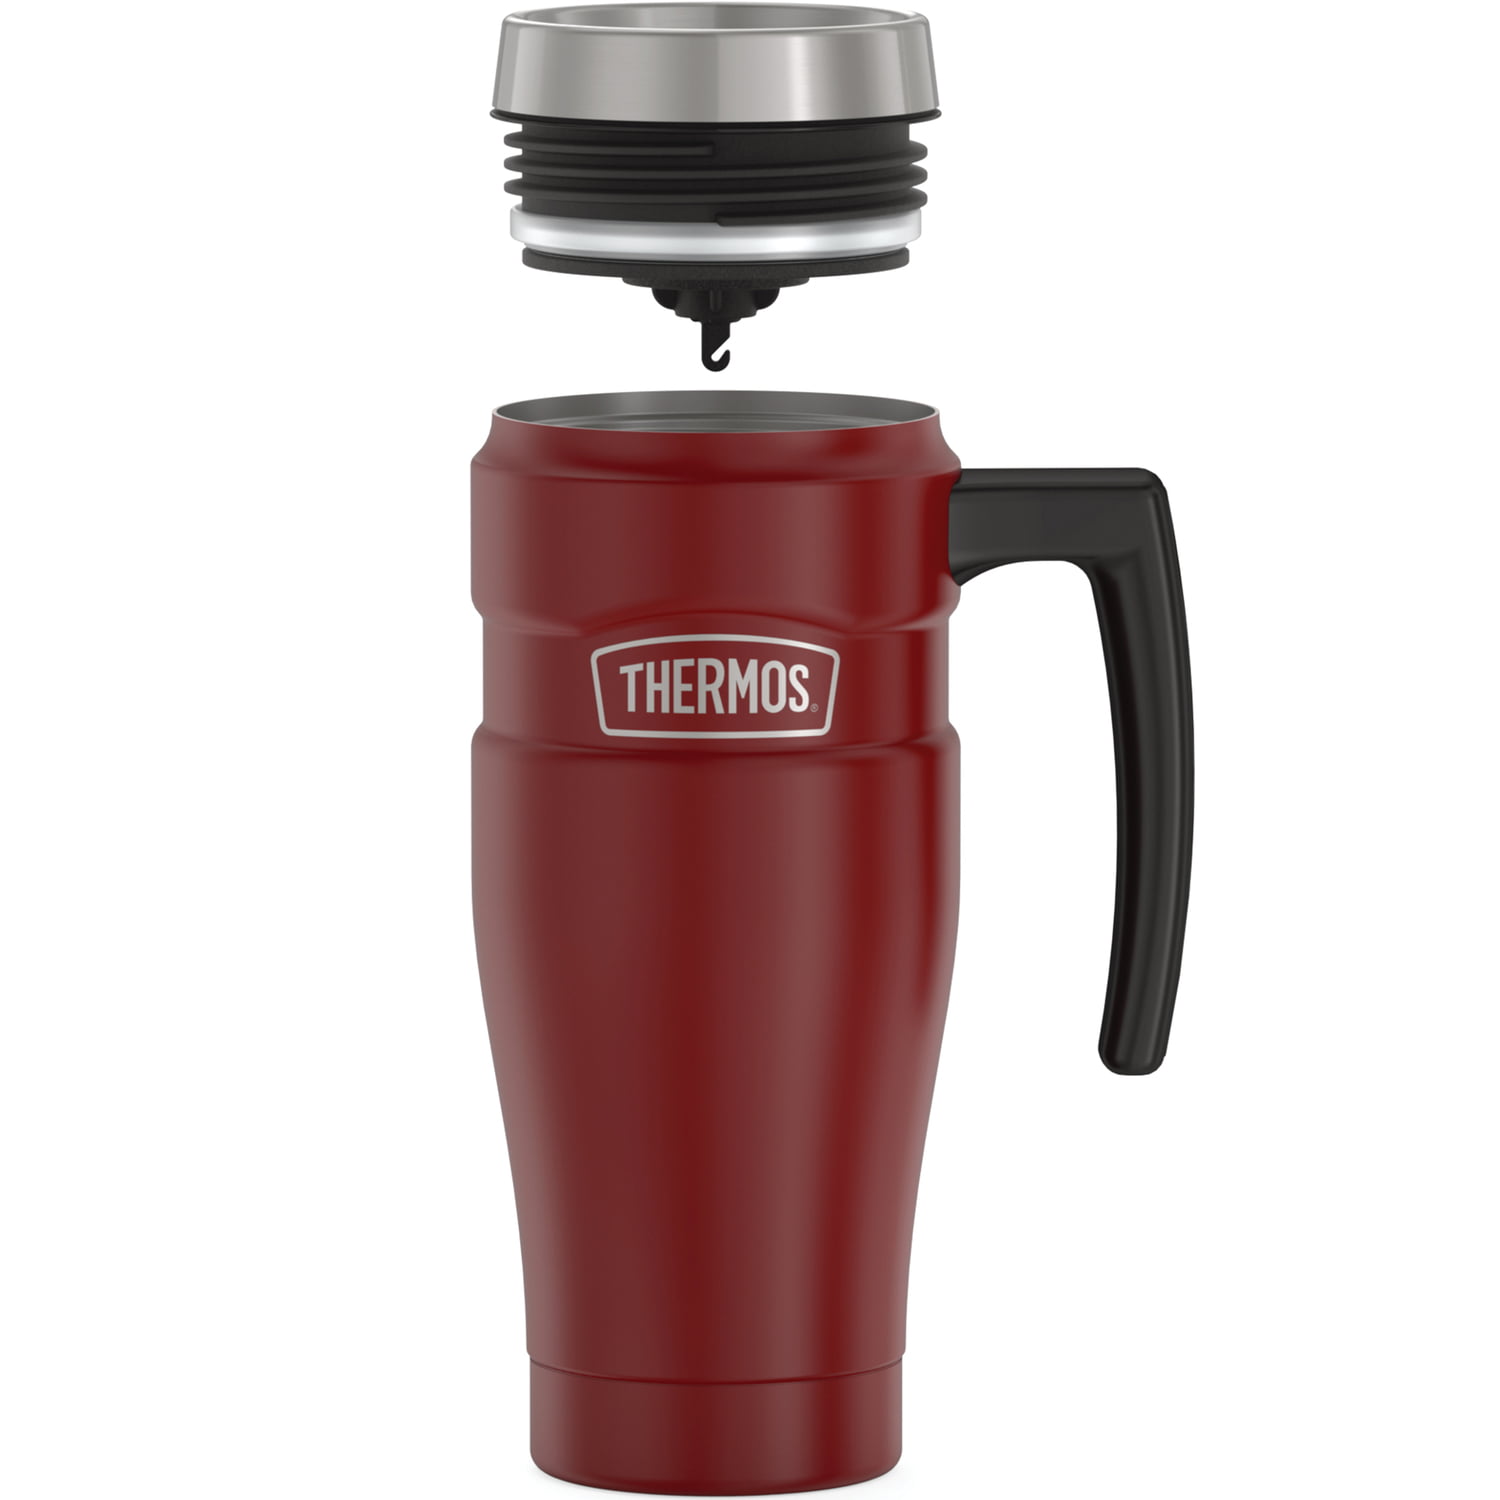 New Thermos 16 Ounce Stainless Steel Commuter Vacuum Insulated Bottle Cup 